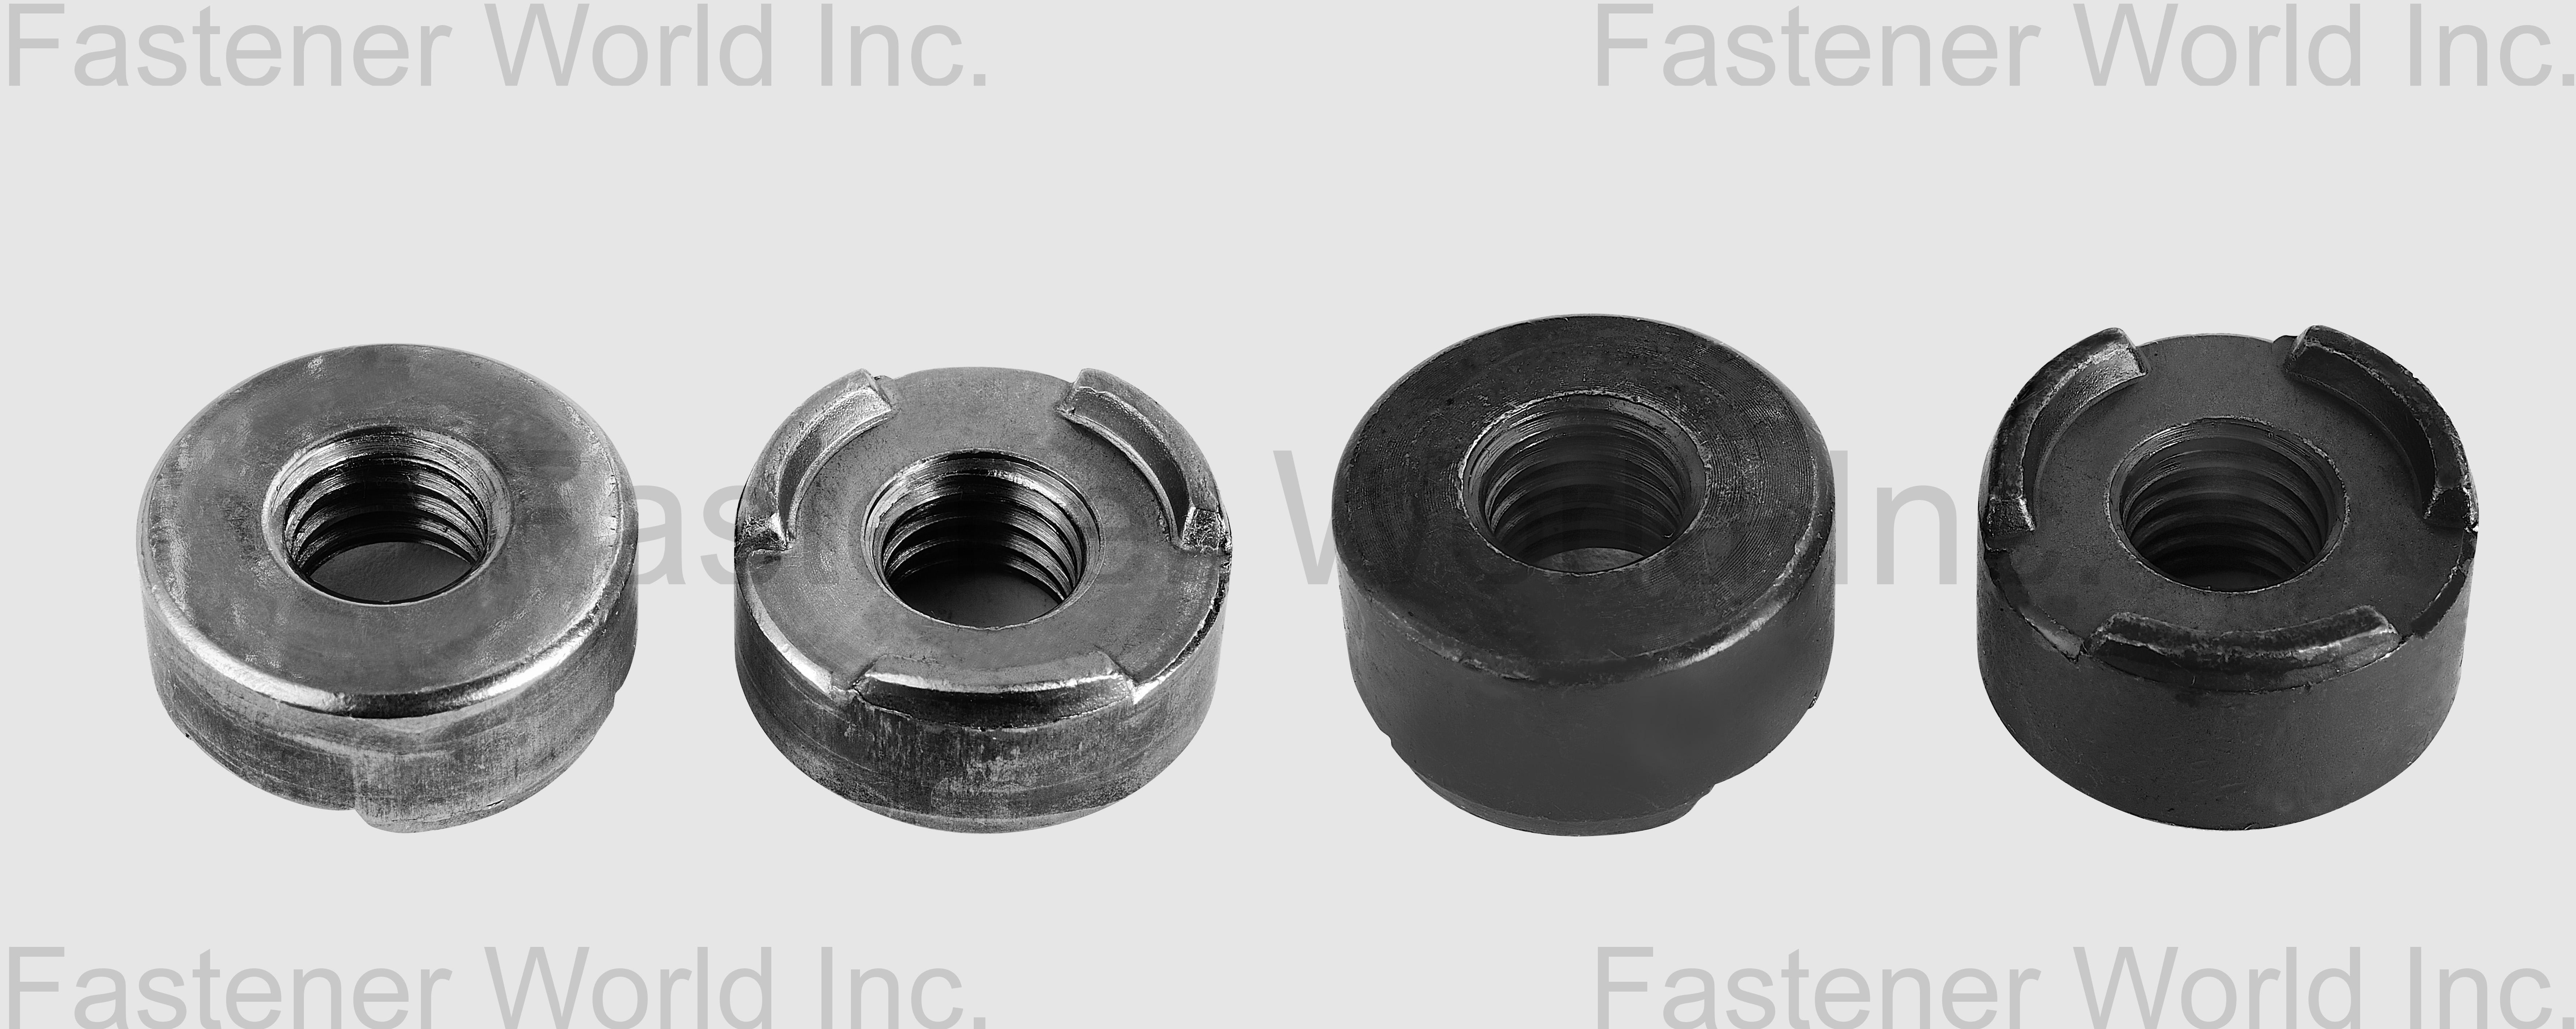 COPA FLANGE FASTENERS CORP. , WELD NUTS , Weld Nuts